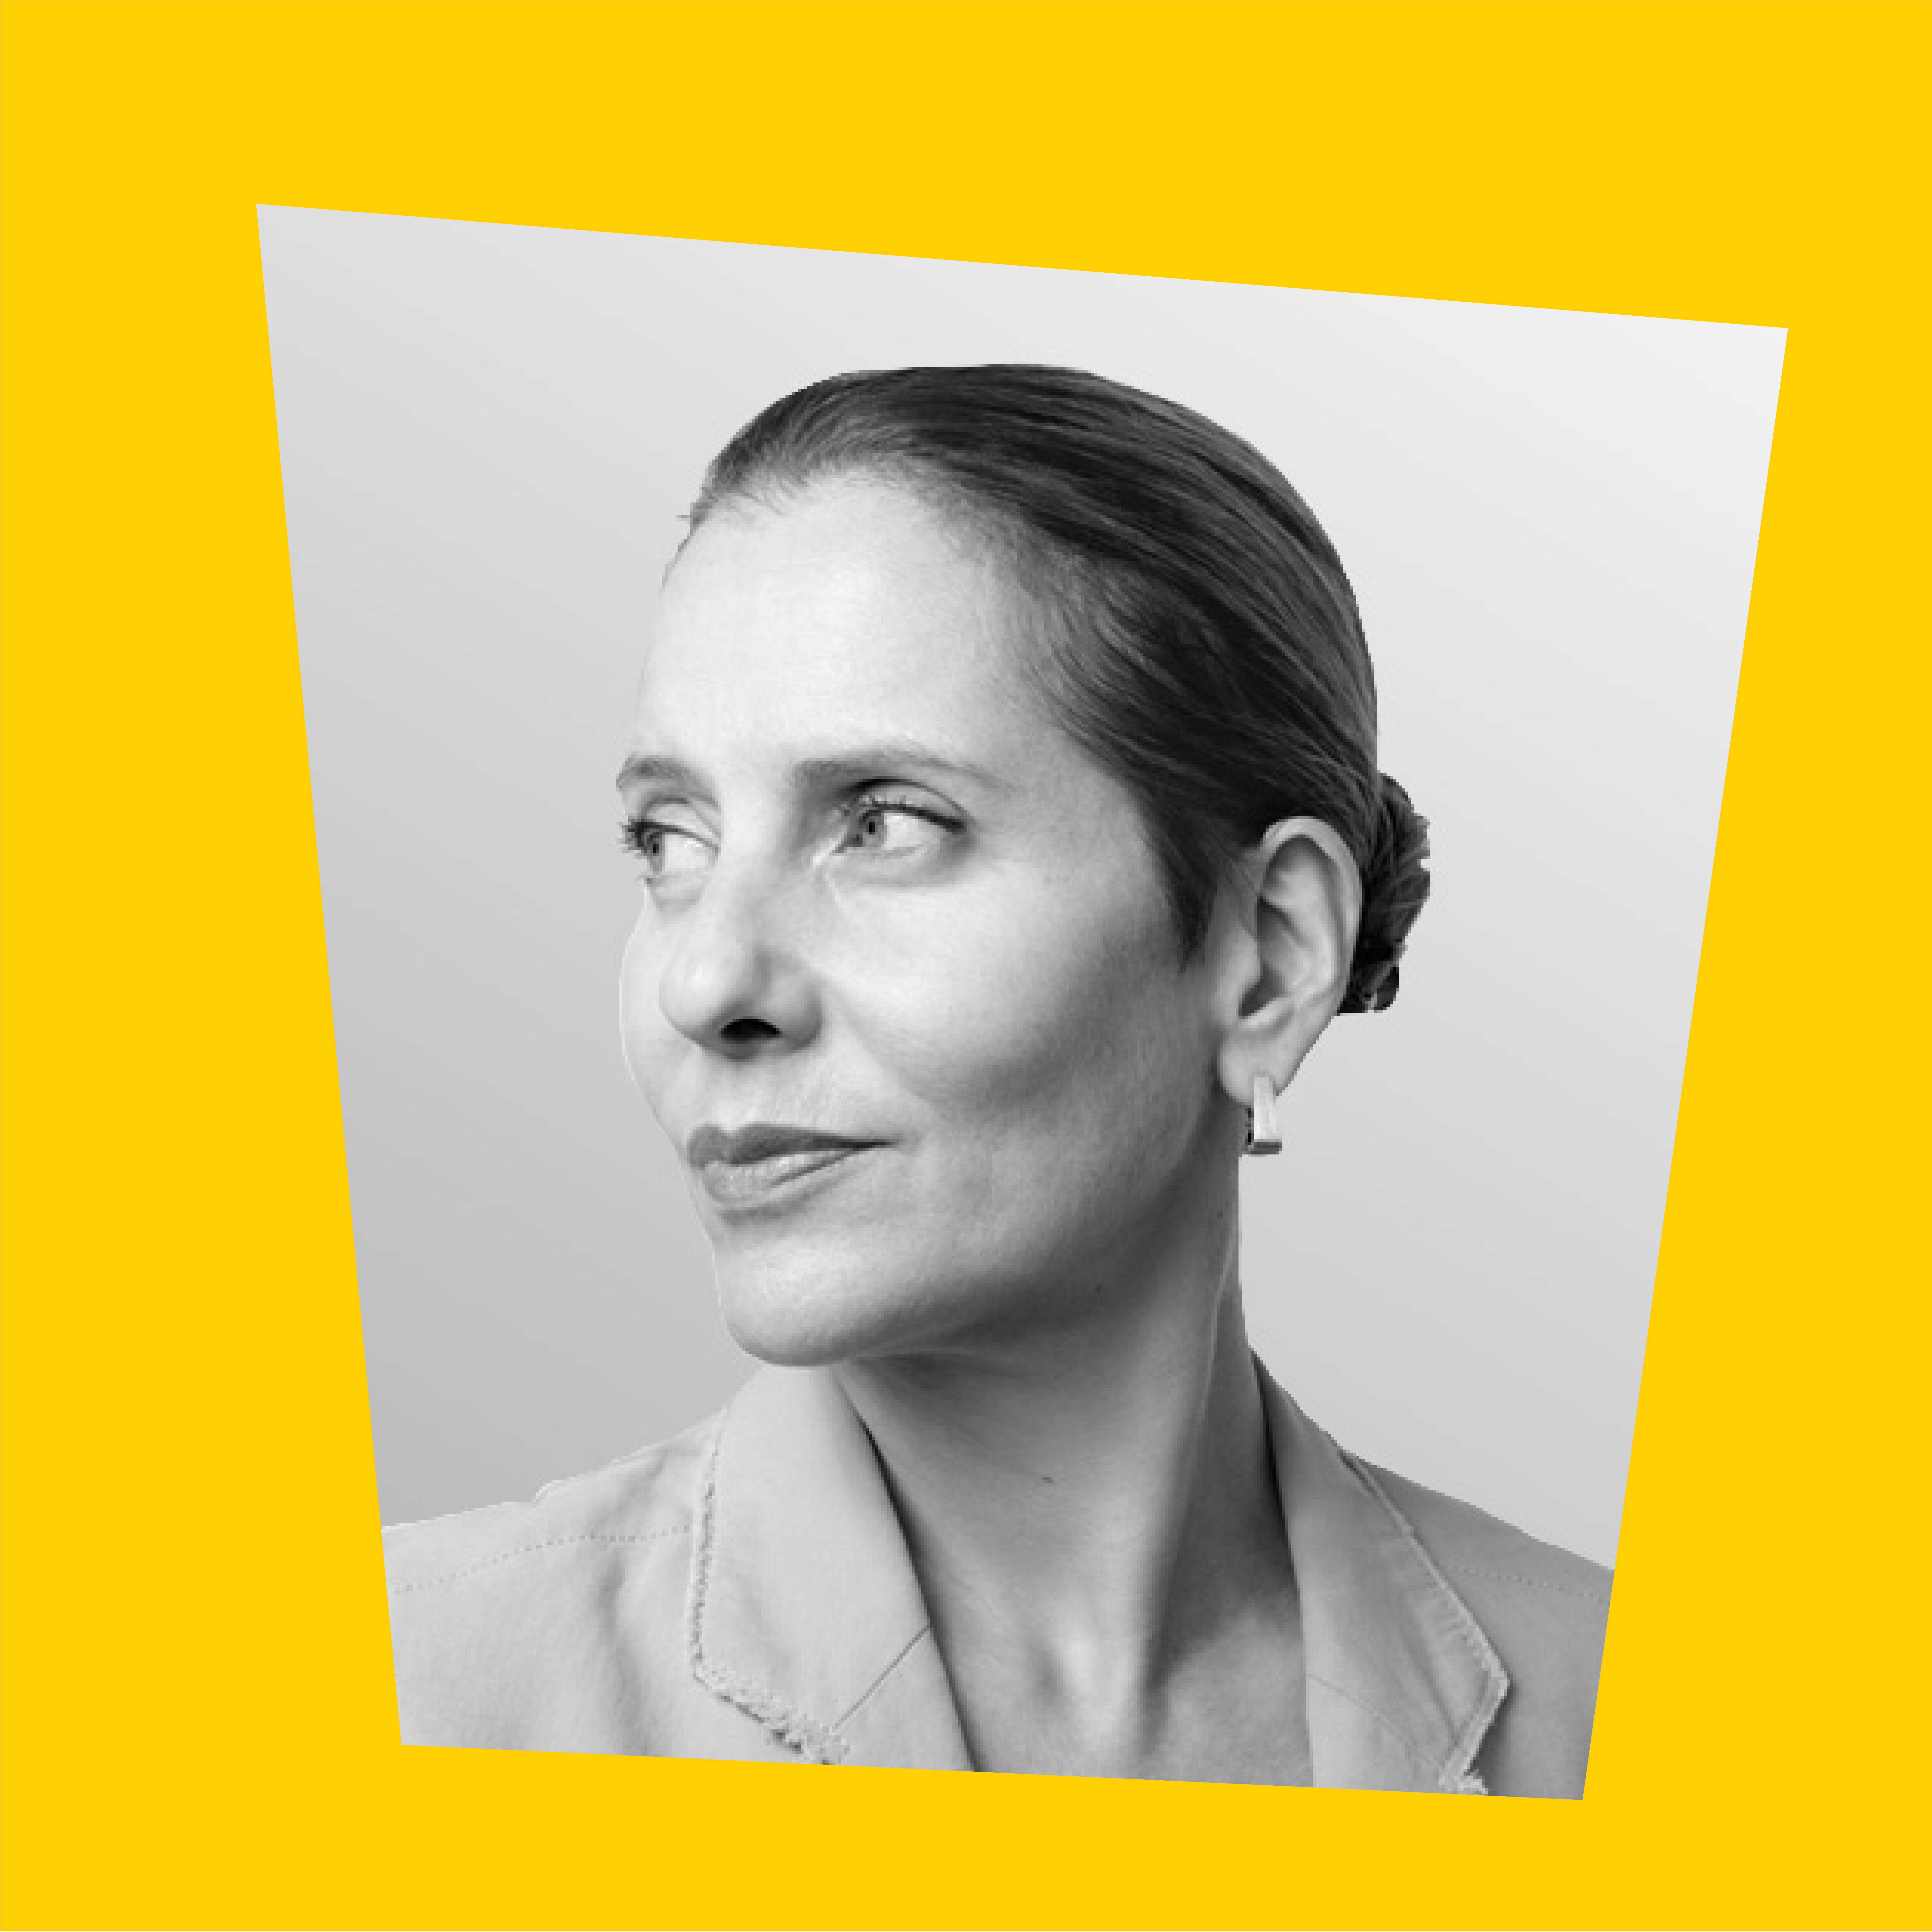 Episode 7: Paola Antonelli on Her Philosophy of Design and The Power of Objects